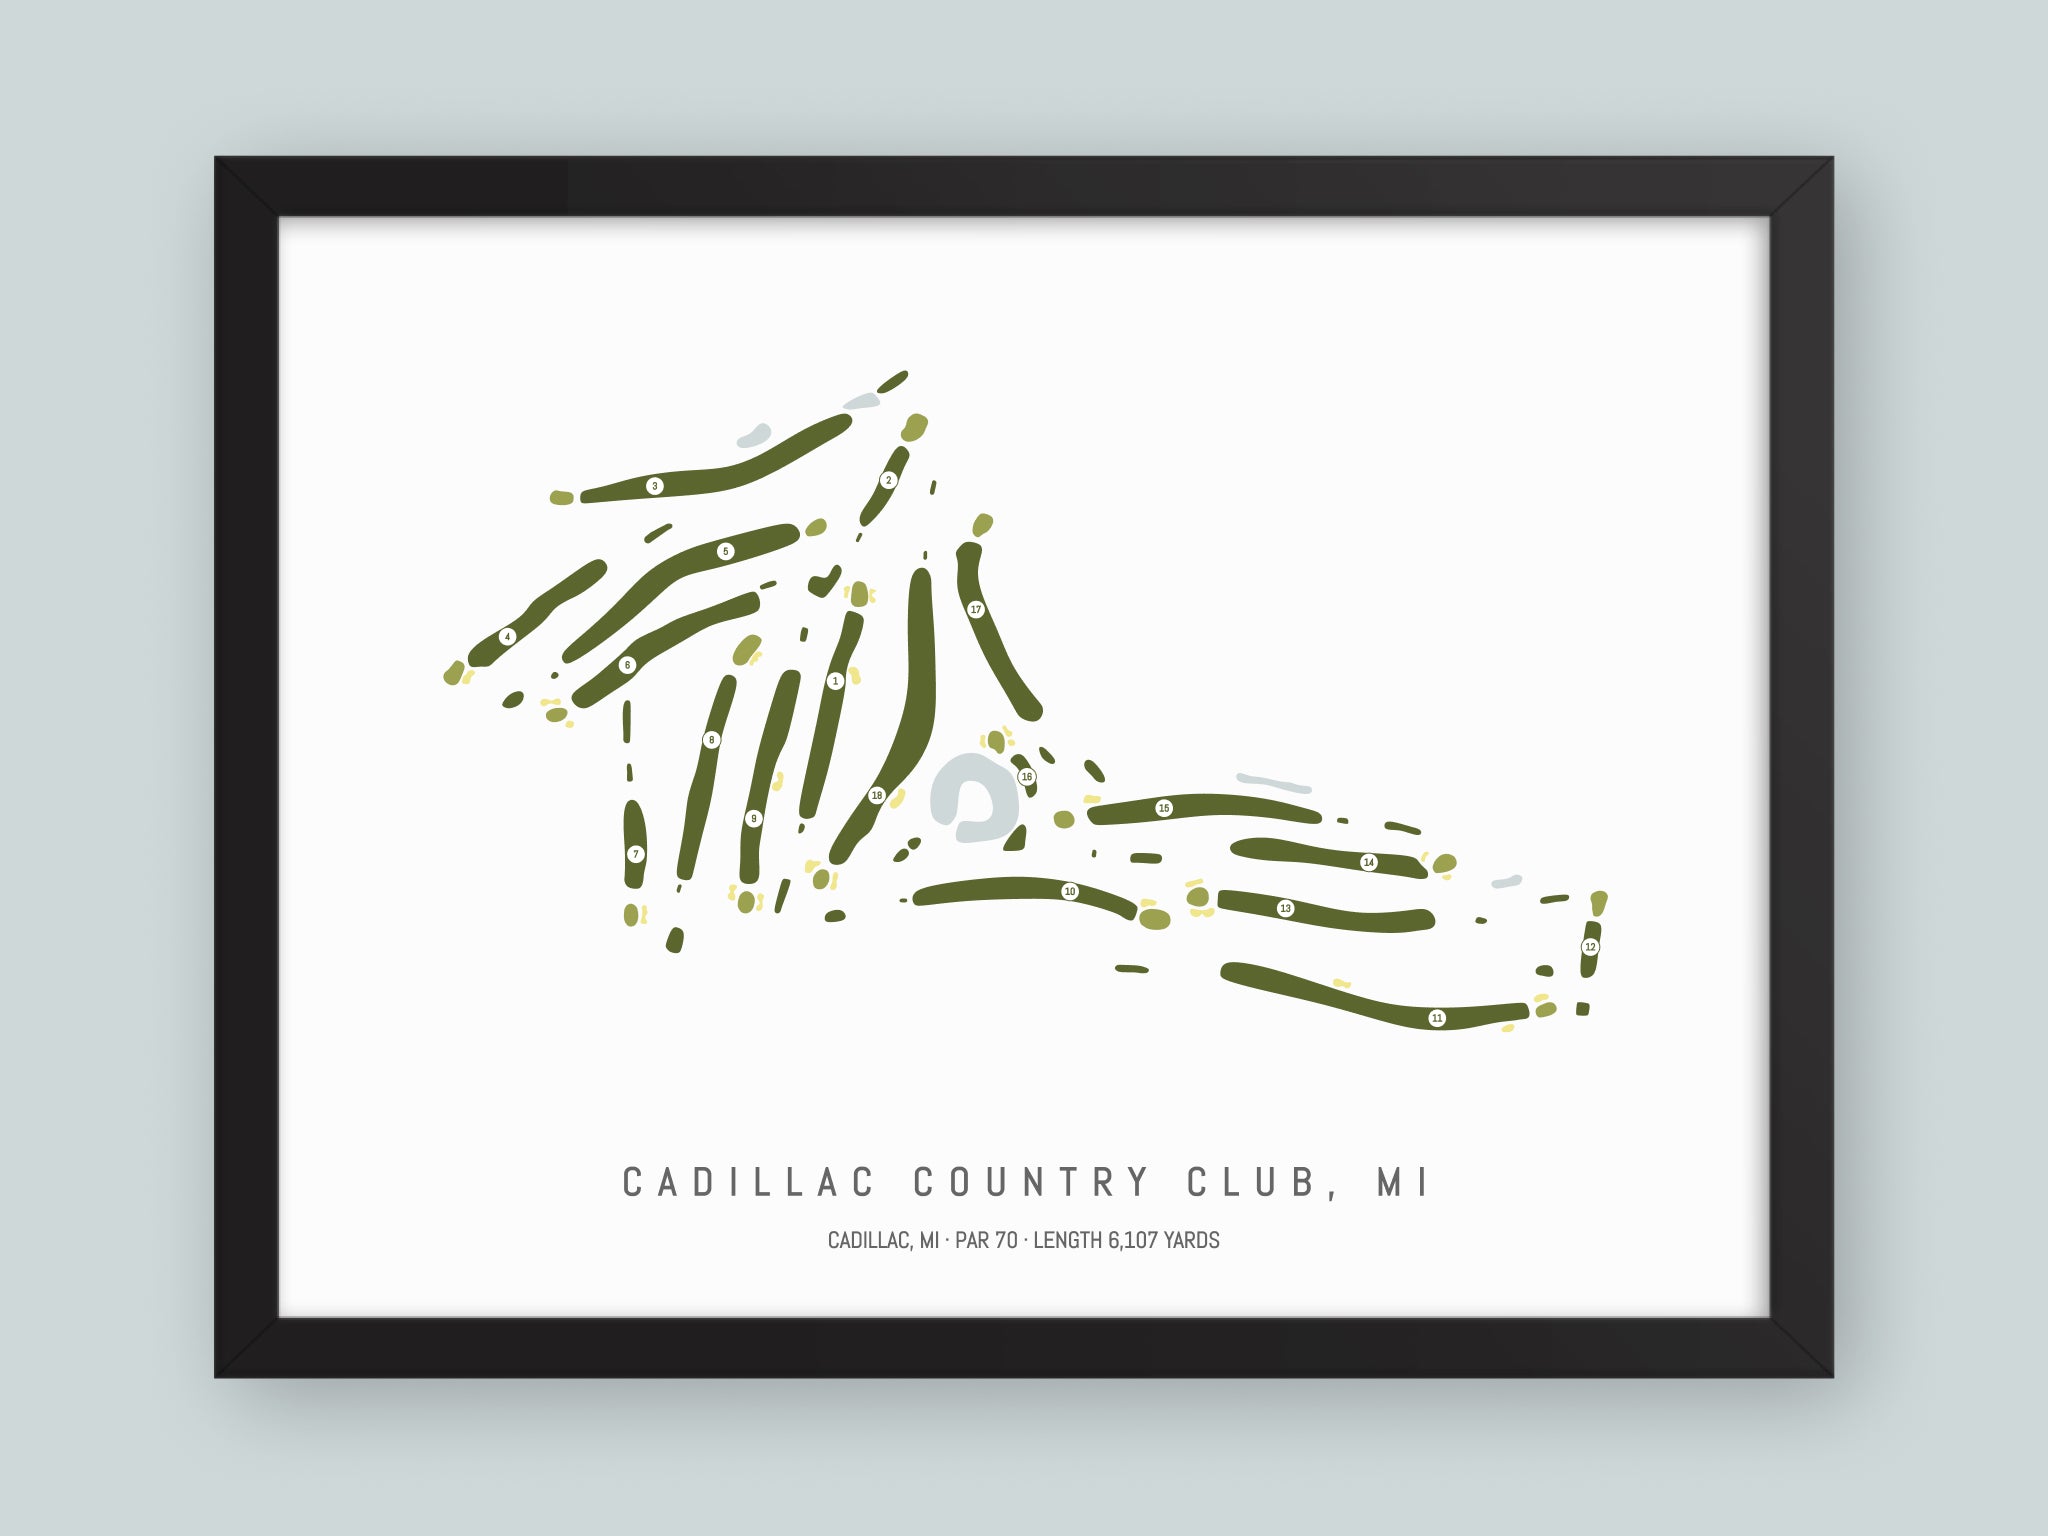 Cadillac-Country-Club-MI--Black-Frame-24x18-With-Hole-Numbers